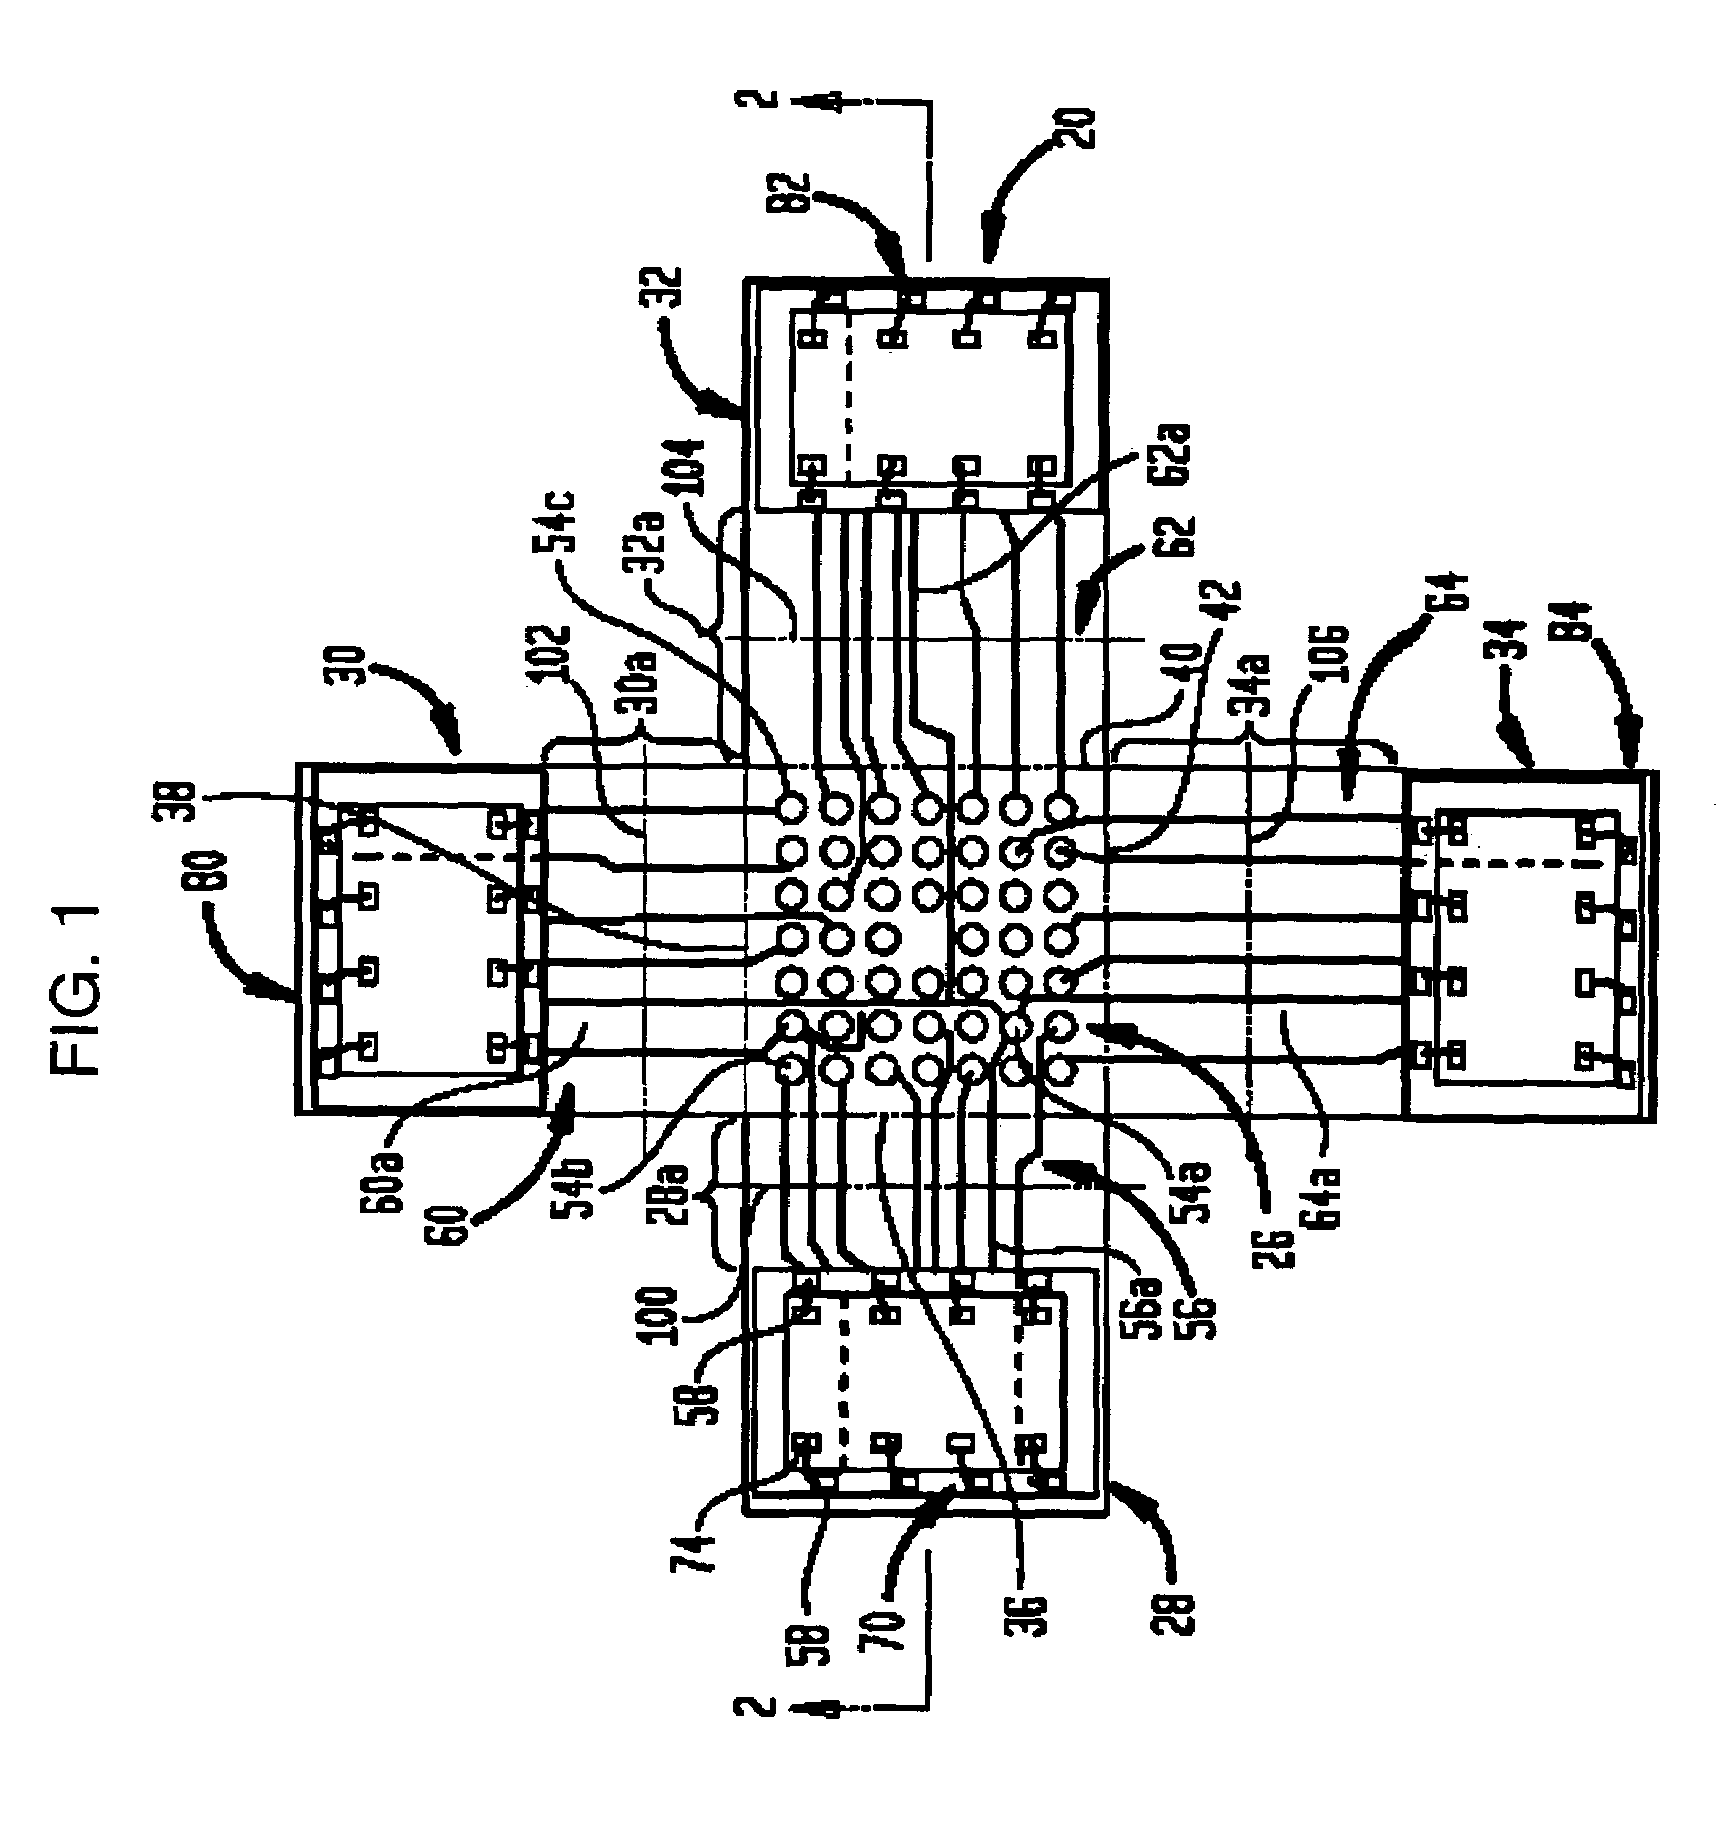 Assemblies having stacked semiconductor chips and methods of making same